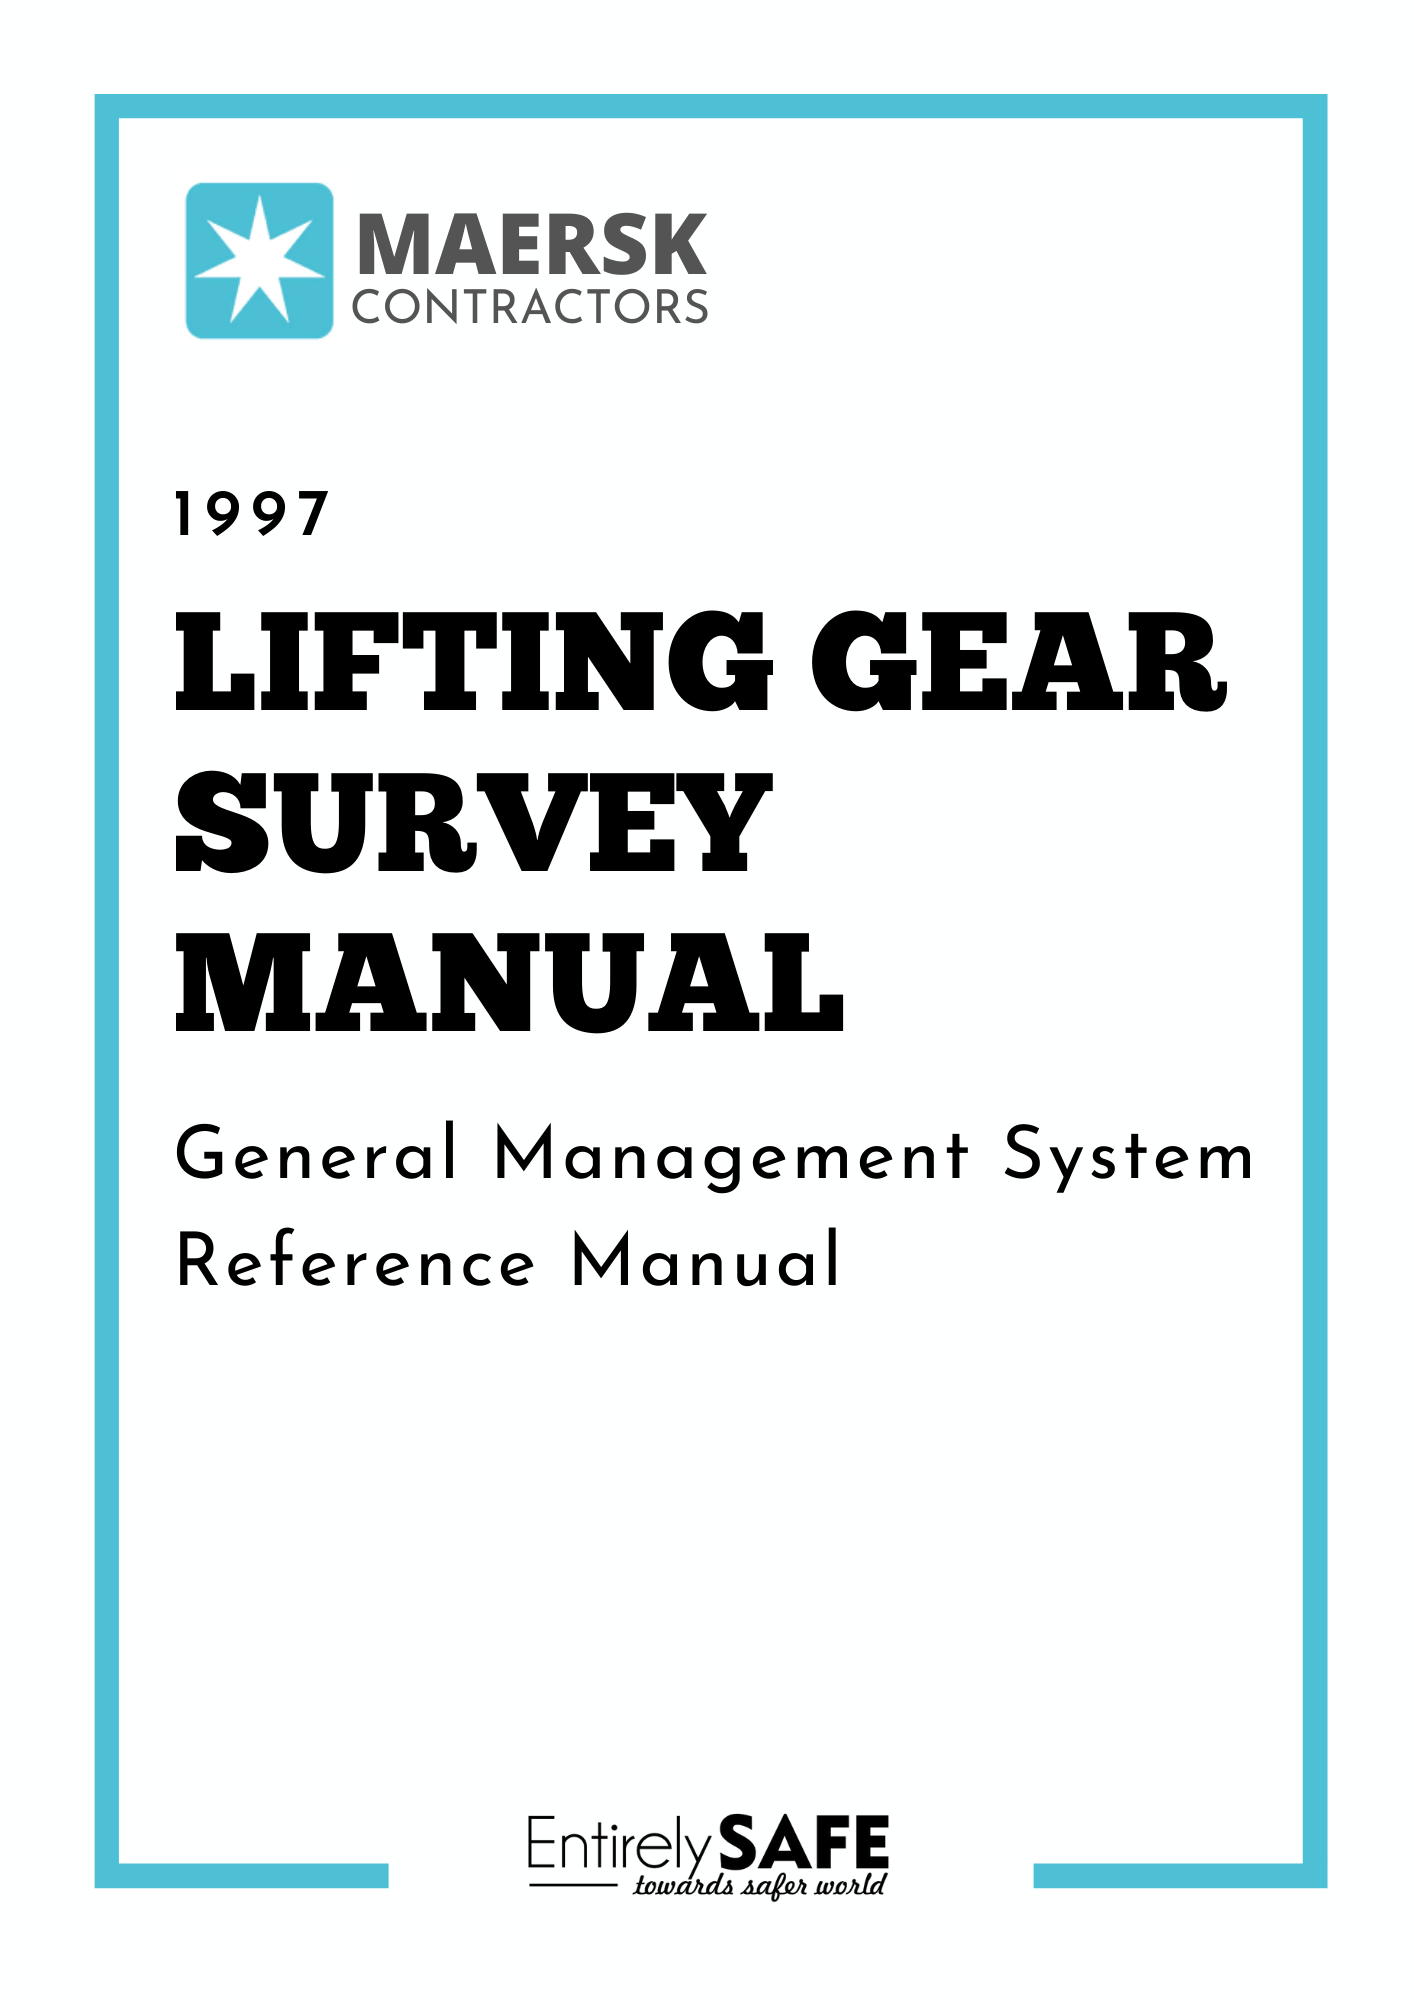 137-FREE-Download-Lifting-Gear-Survey-Manual-Maersk-Contractors